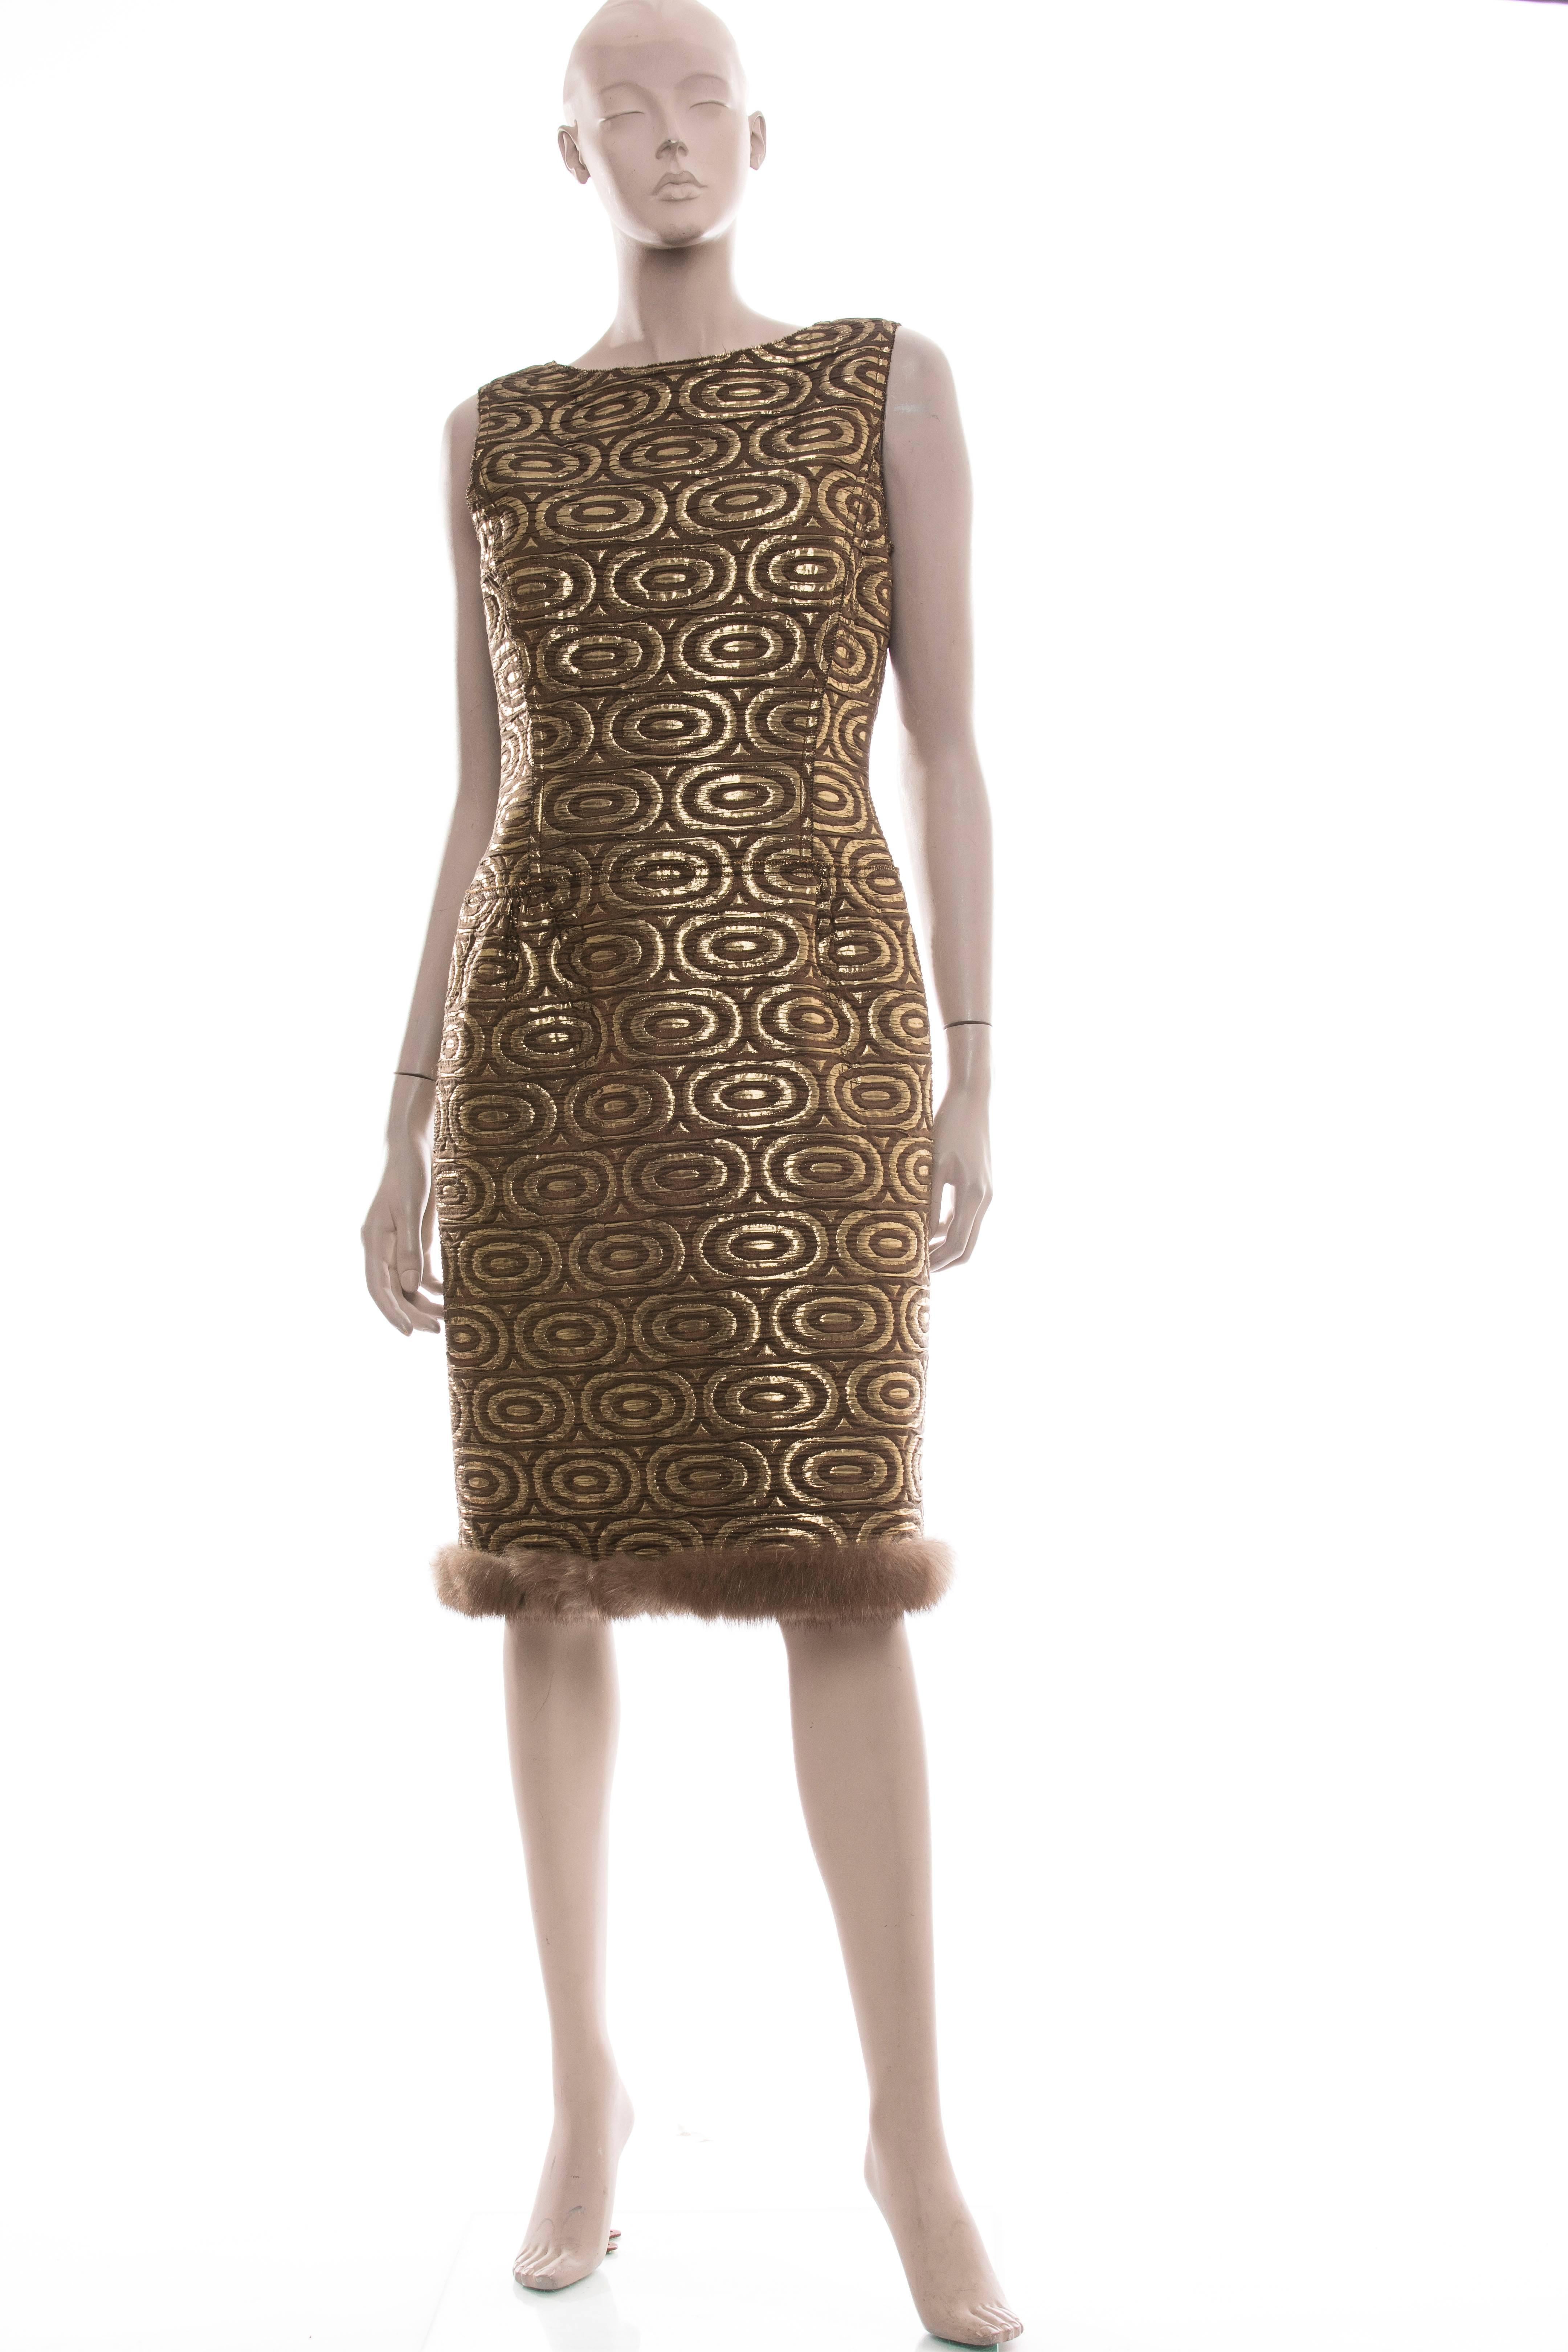 Oscar de la Renta, Fall 2007, sleeveless dress, back zip with Russian Sable trim and fully lined in silk.